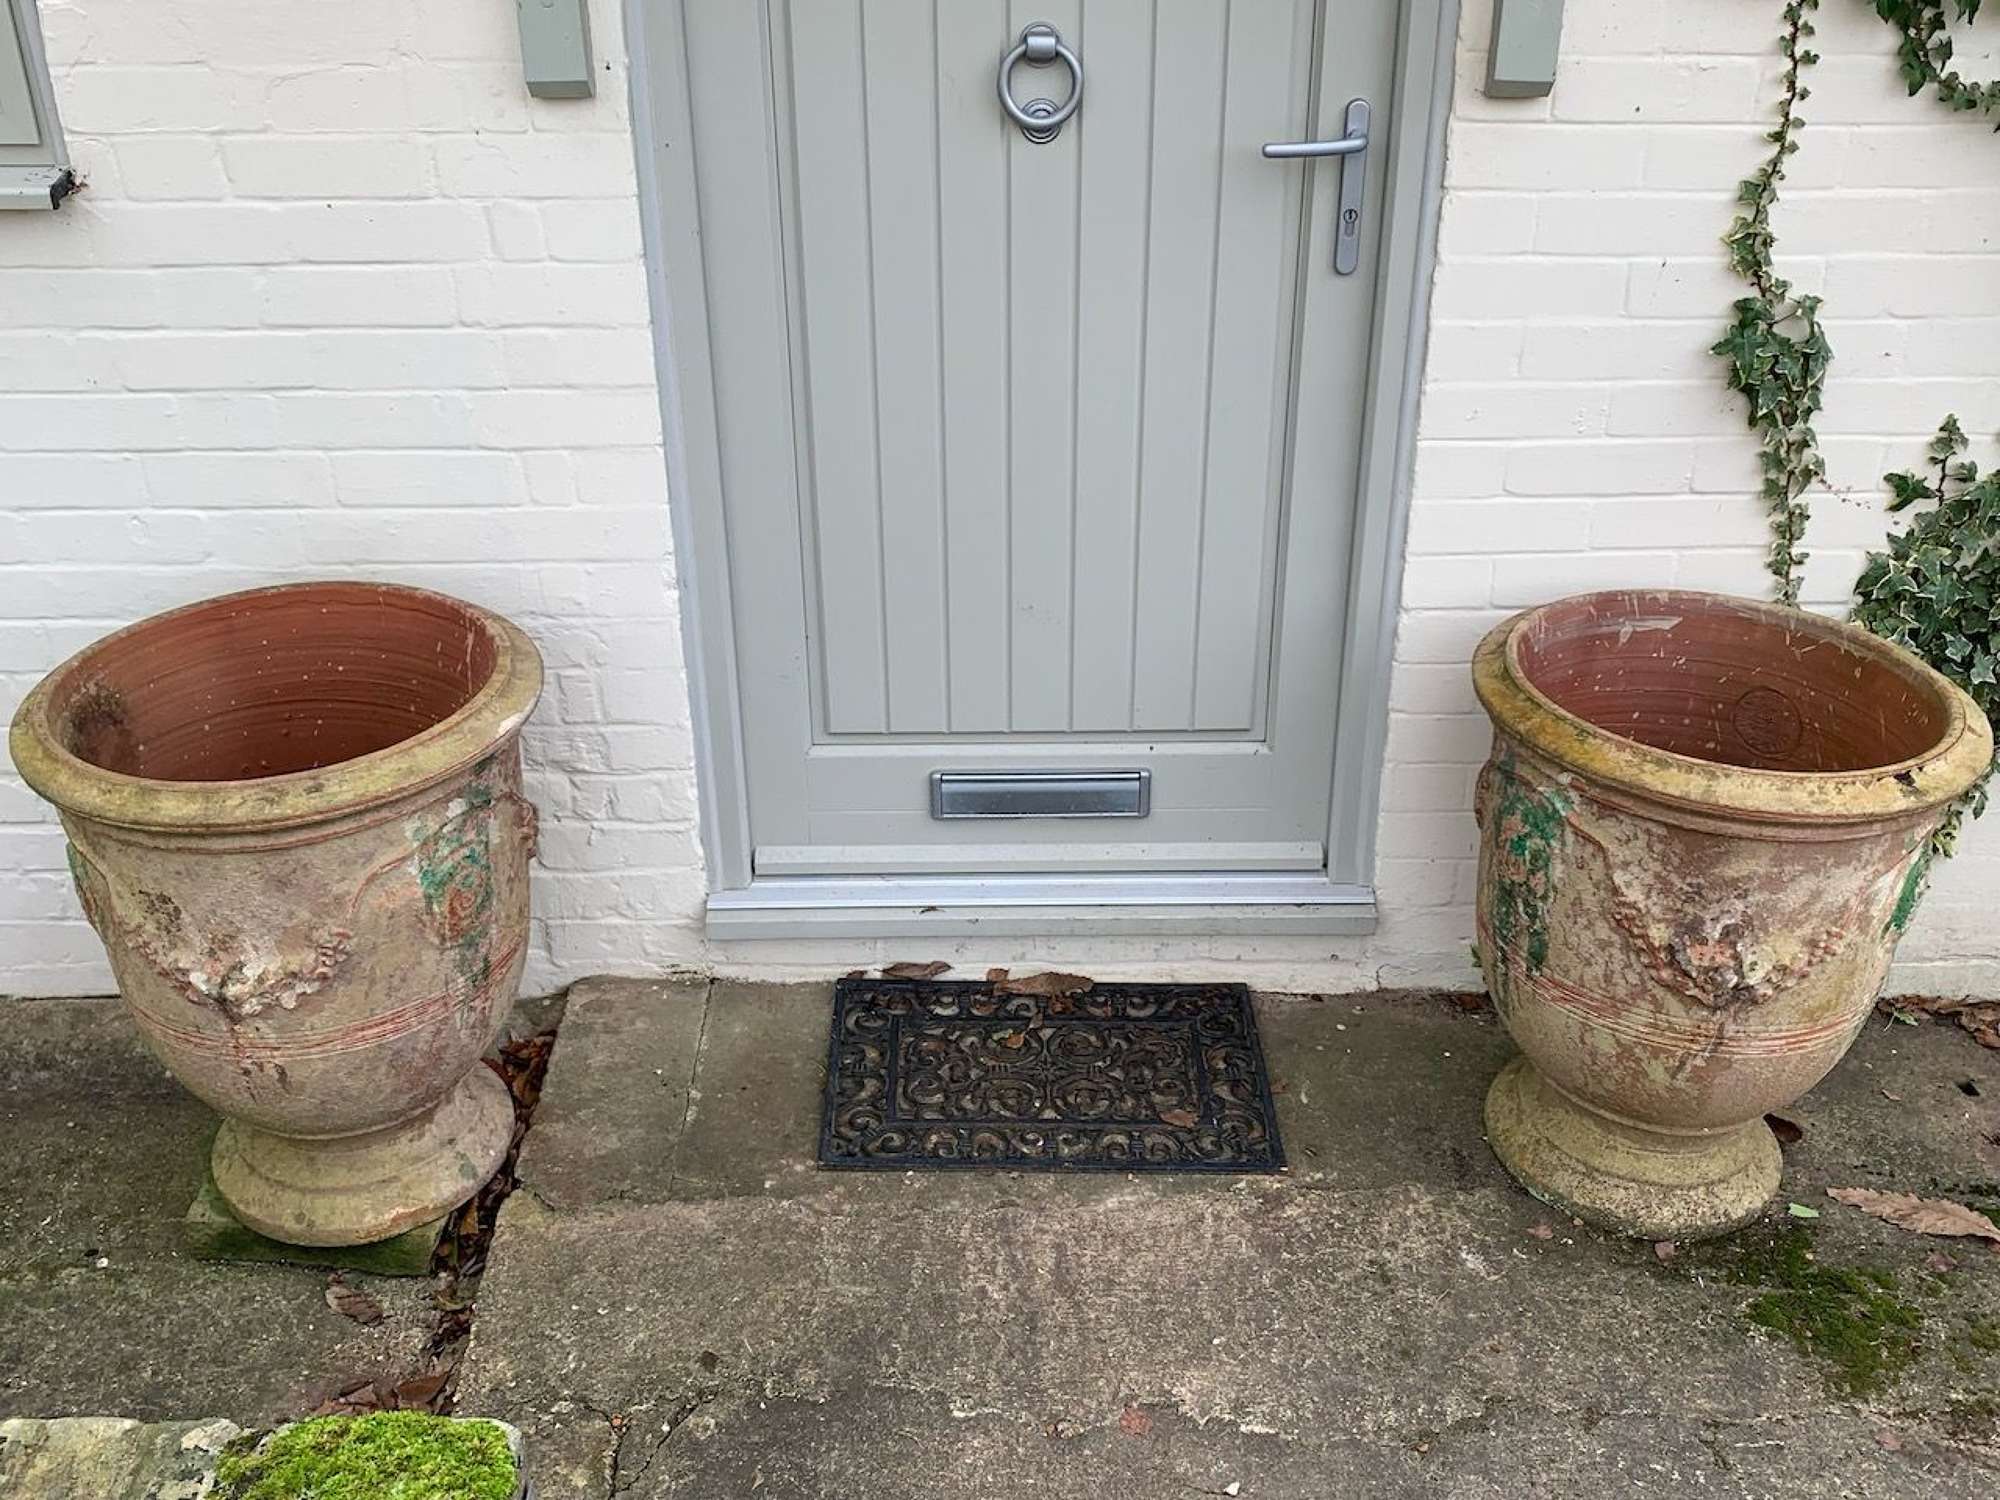 Pair of Anduze planters